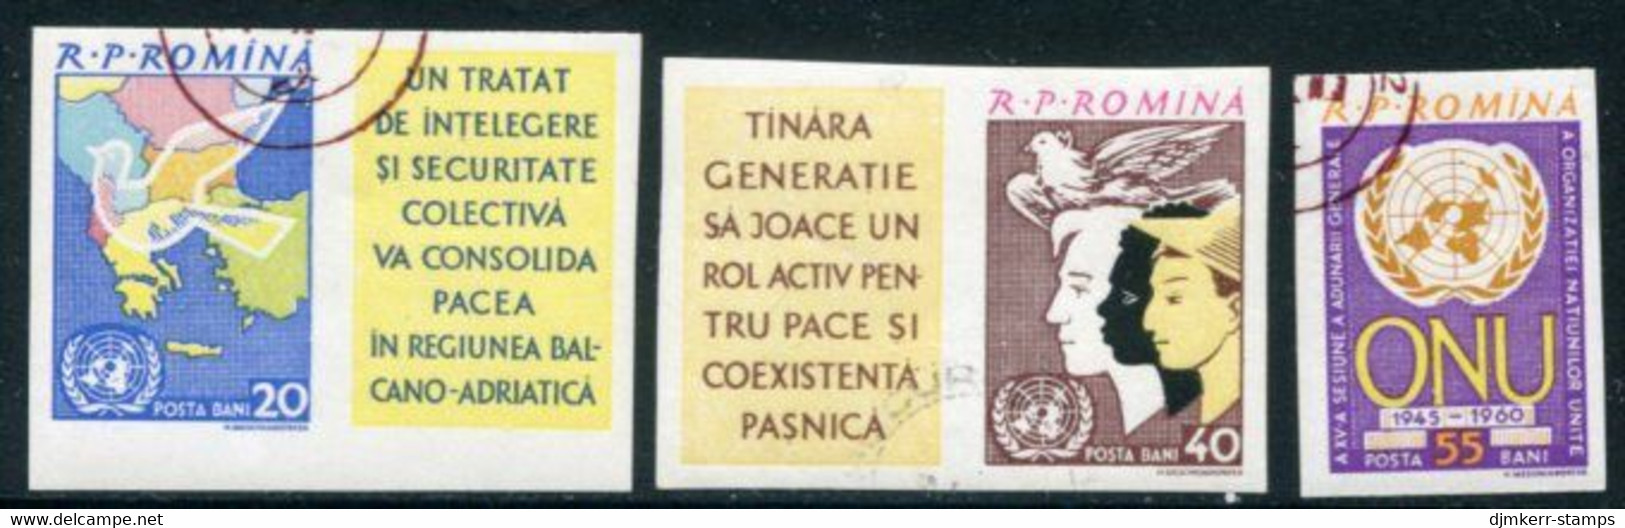 ROMANIA 1961 United Nations Imperforate Used.  Michel 2037B-39B - Used Stamps